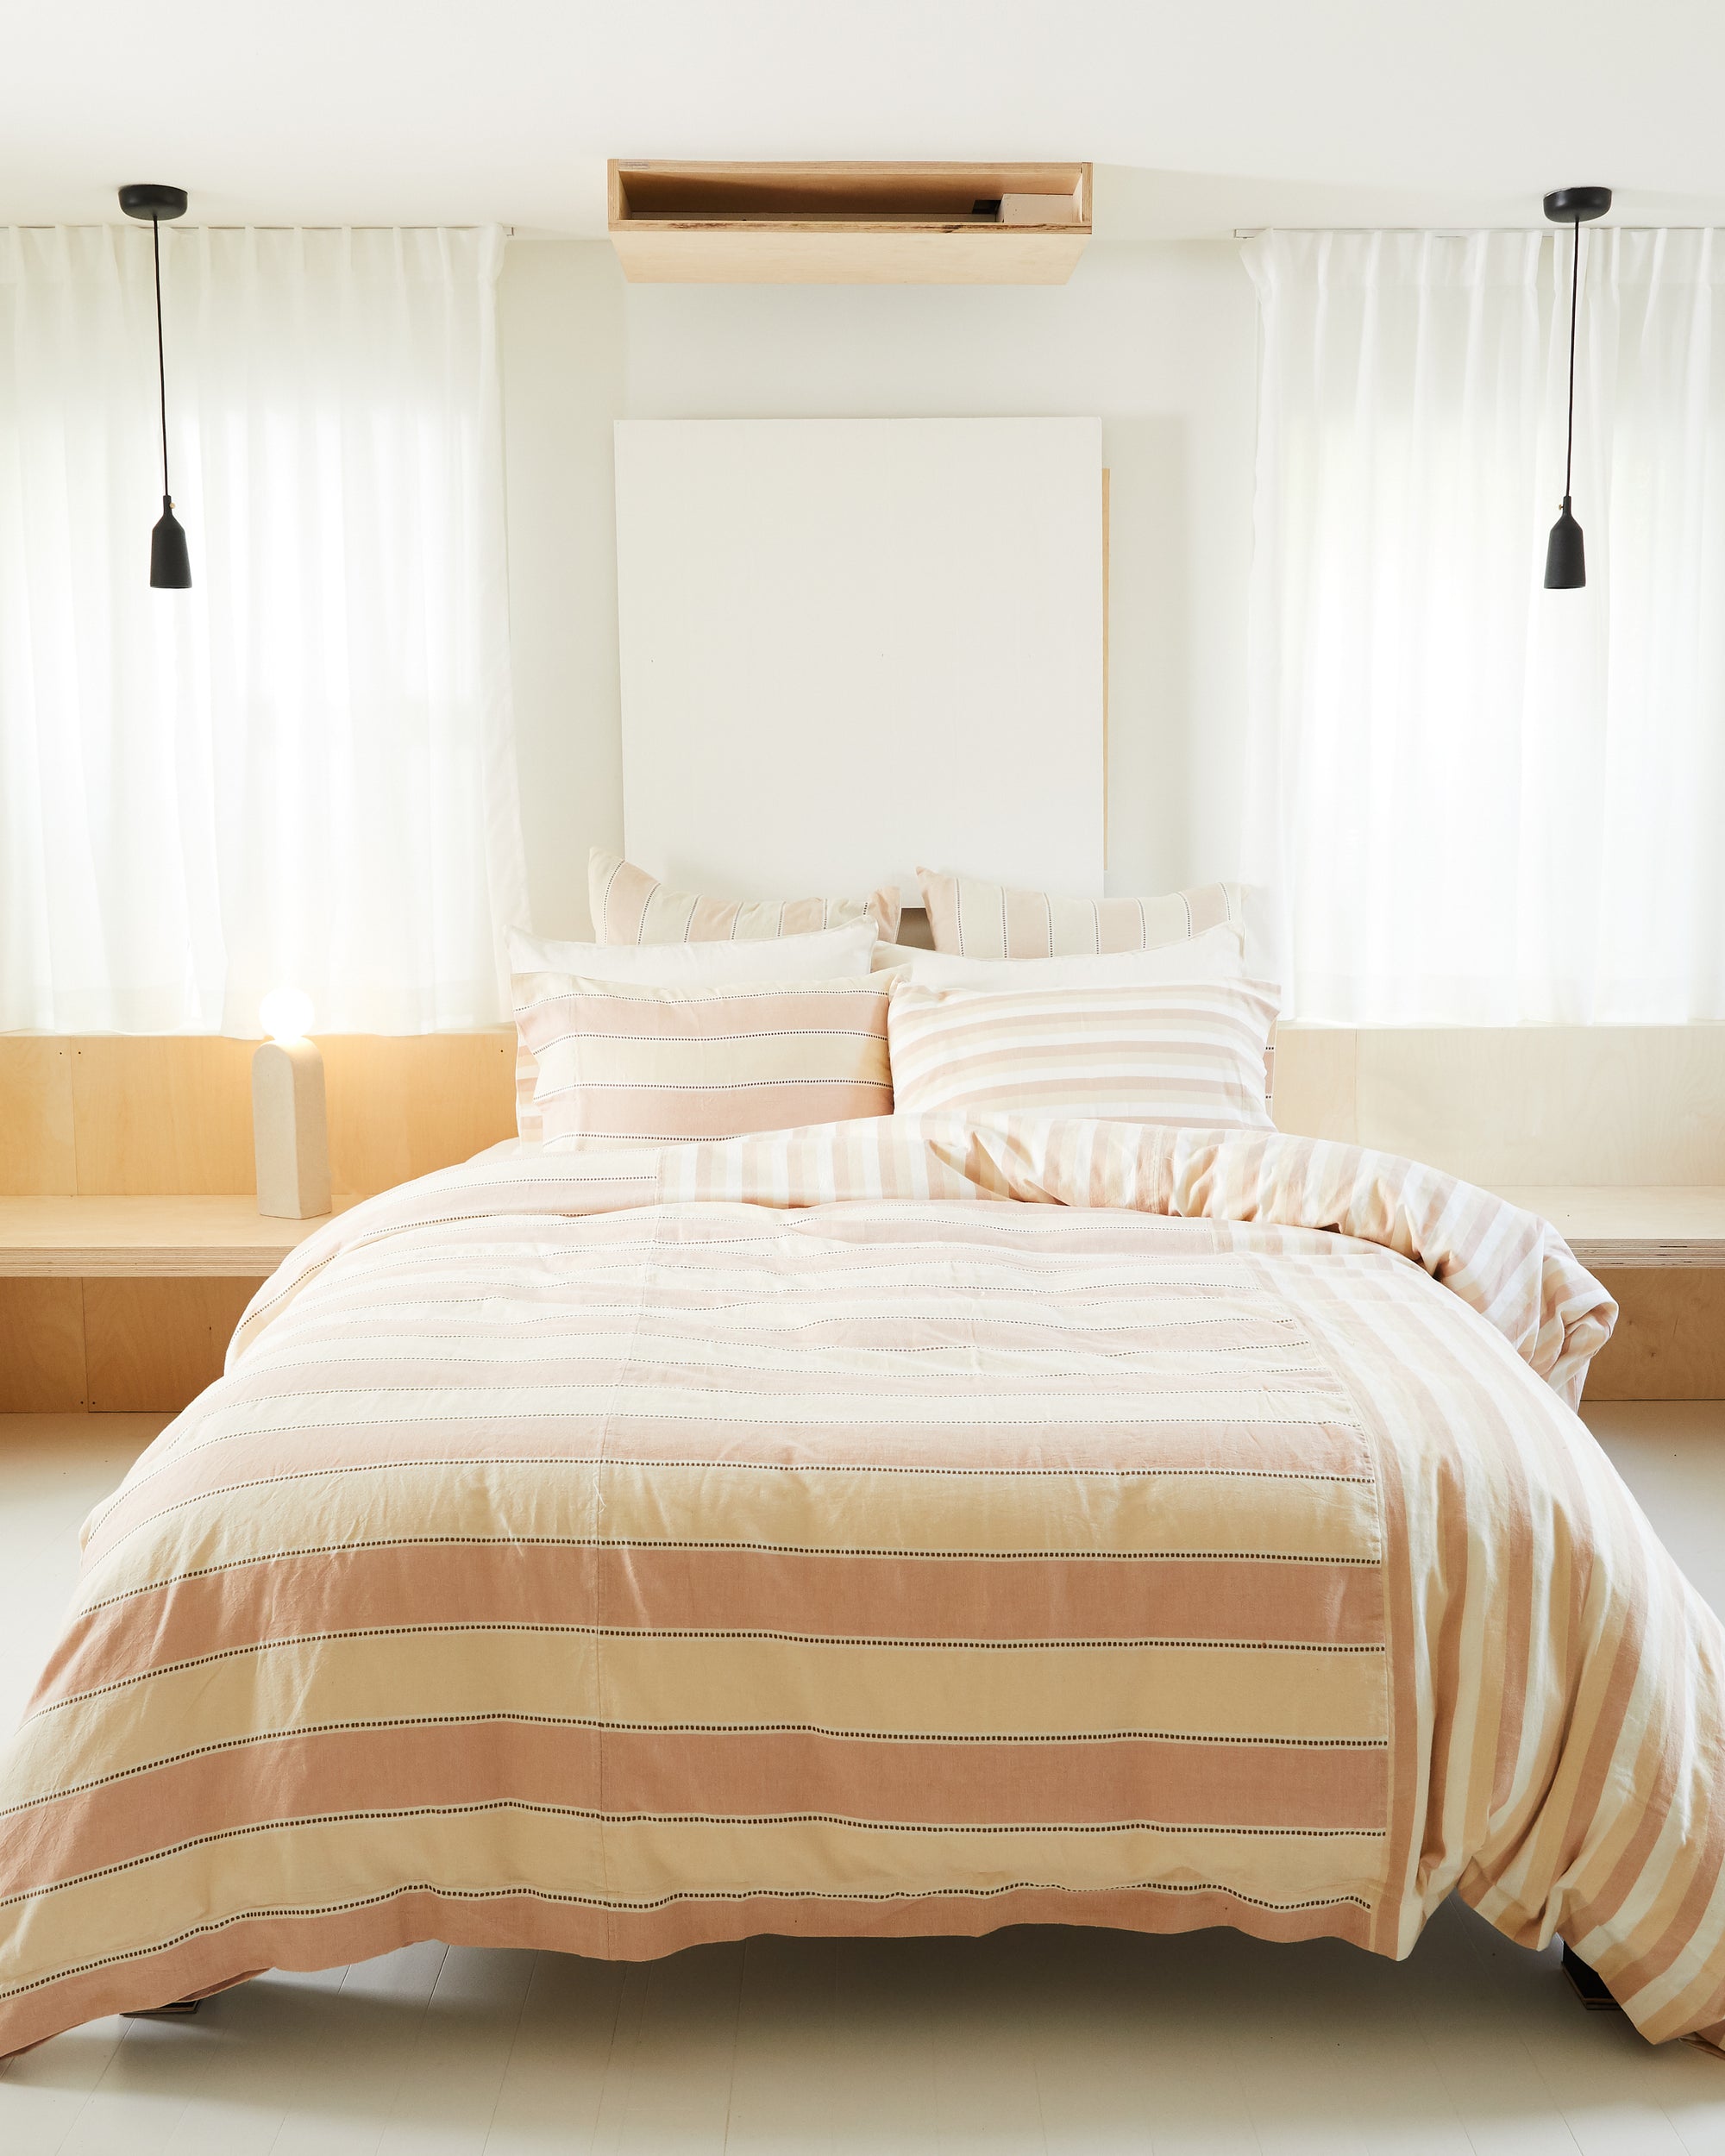 Bright bedroom with ethically handwoven oeko-tex cotton bedding designed by MINNA in peach terracotta clay colored neutral stripes